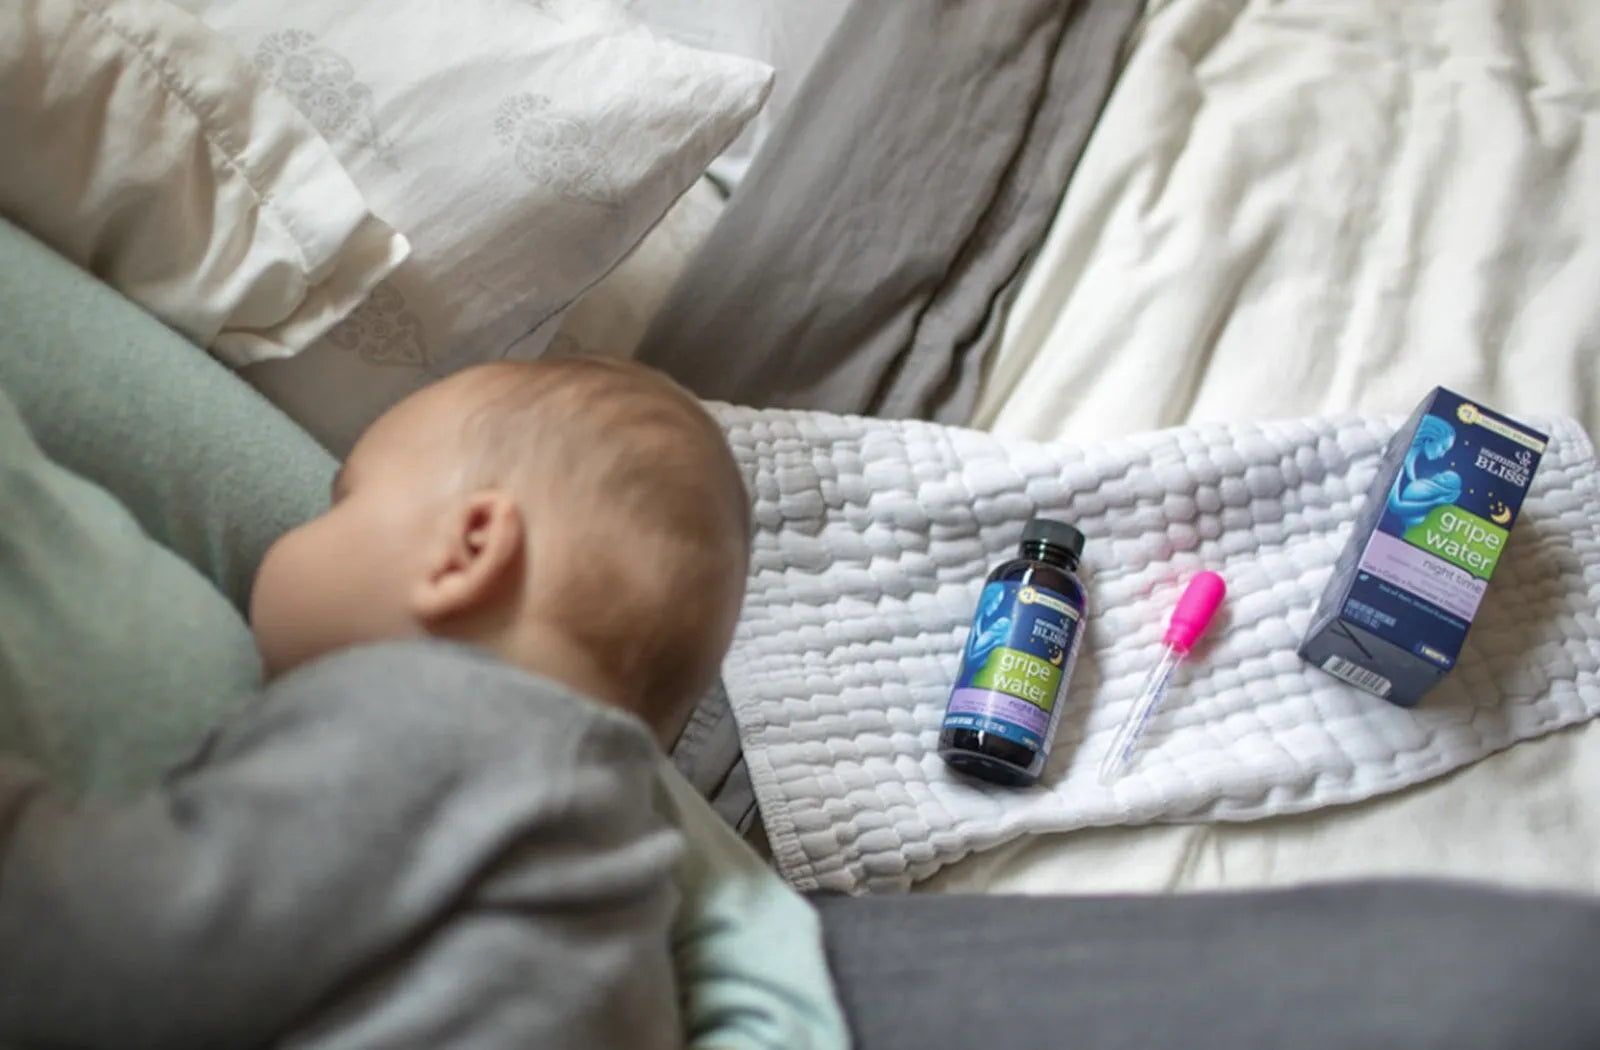 A baby sleeping with some MB products used